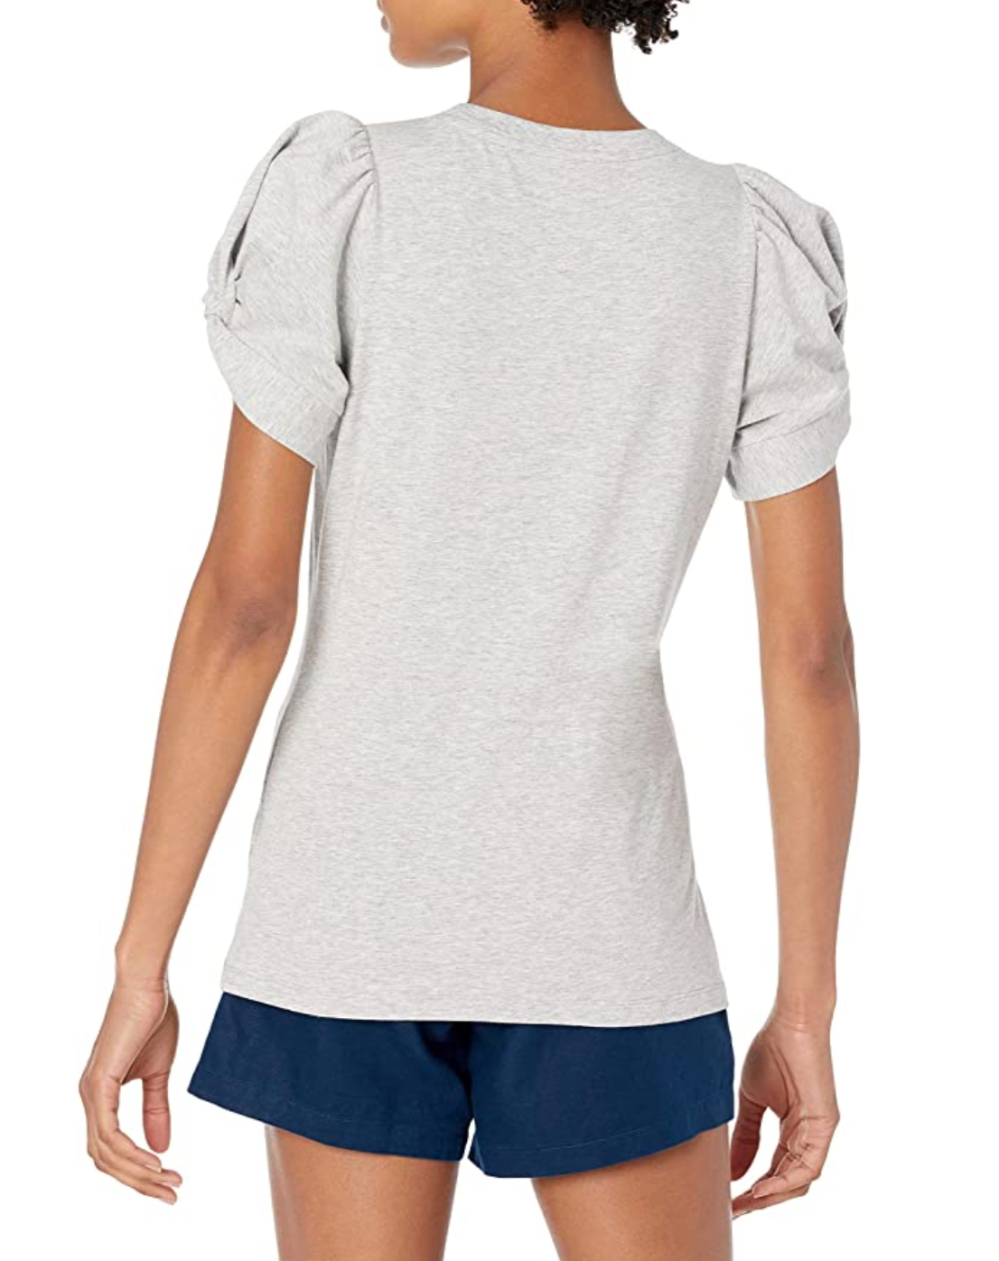 Essentials Puff-Sleeve Top Upgrades the T-Shirt